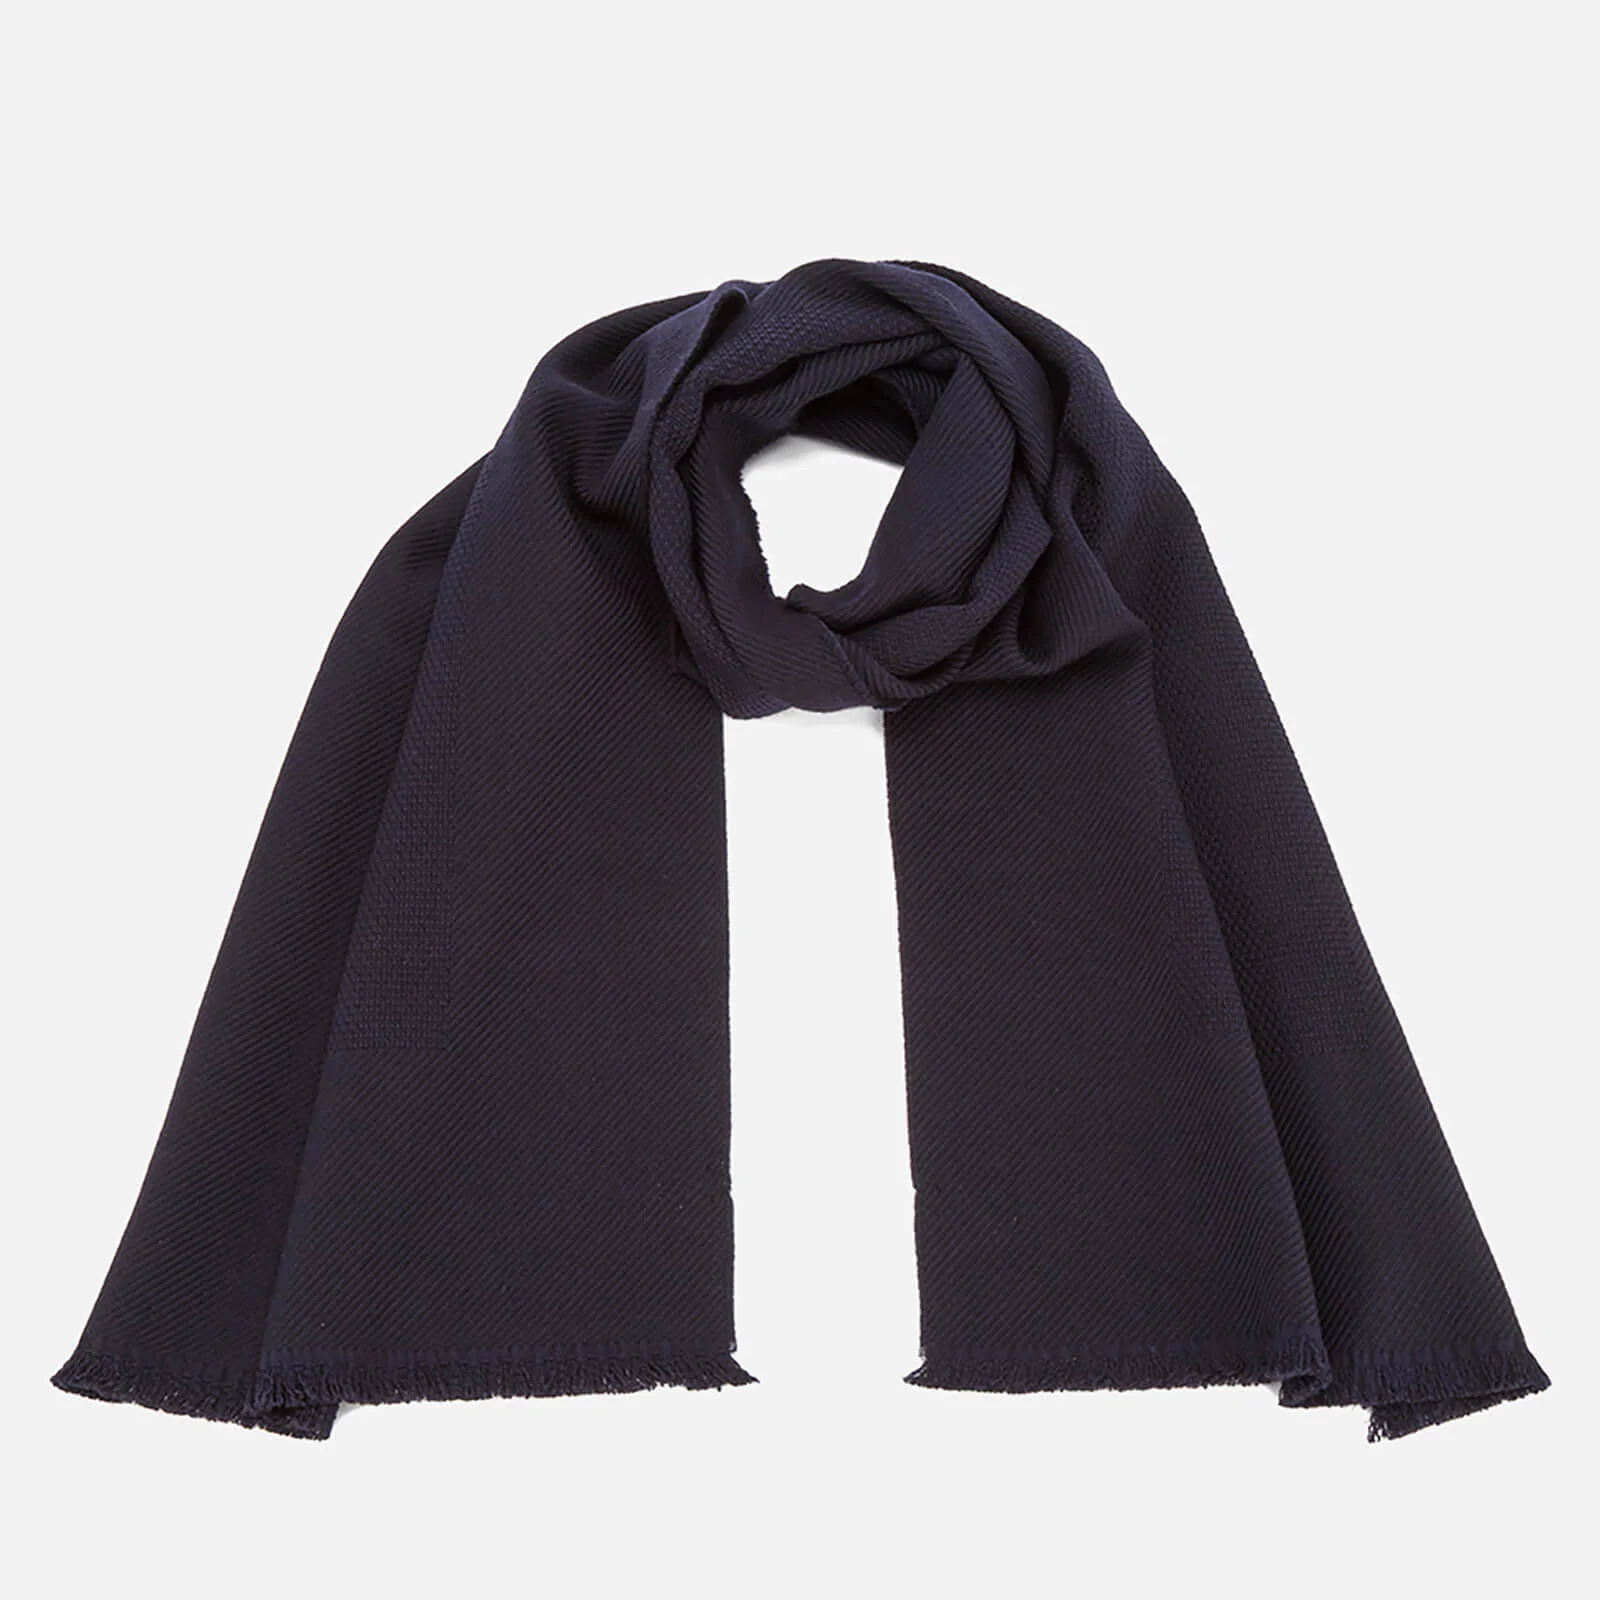 Paul Smith Accessories Men's Panelled Weave Scarf - Navy Image 1